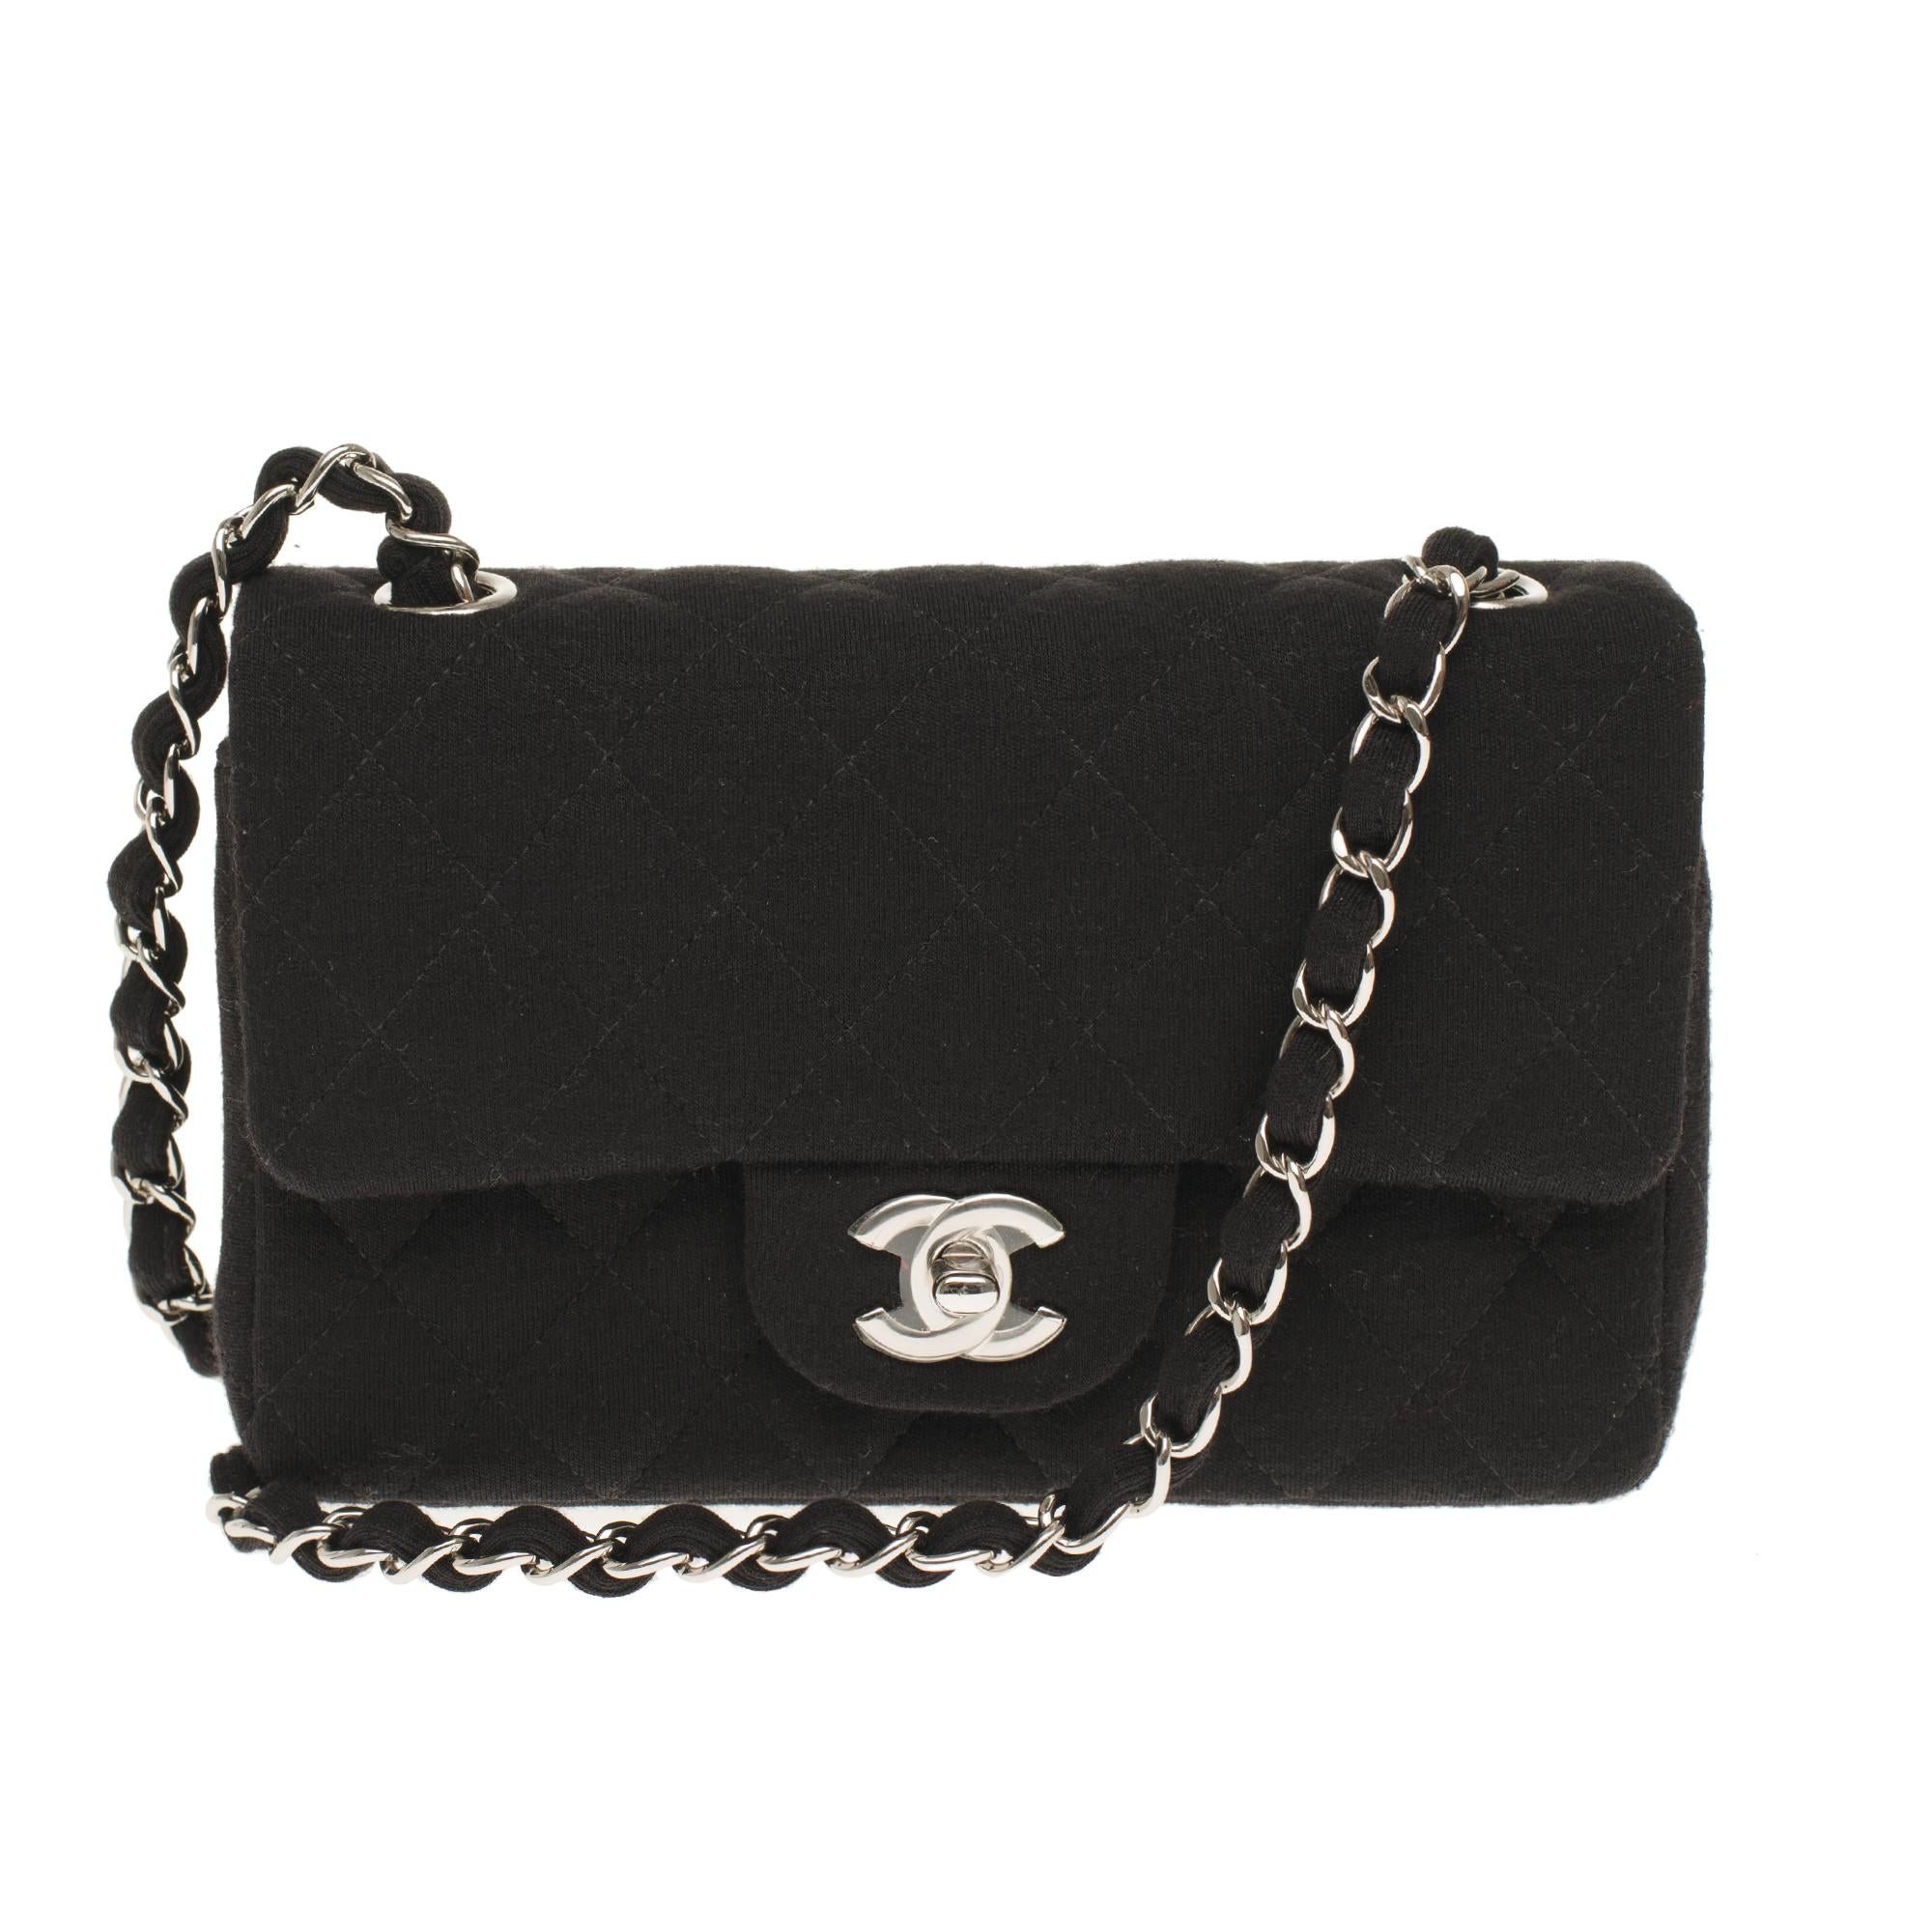 Gorgeous Mini Chanel Timeless/ Classic in black canvas, silver metal trim , a silver metal chain handle intertwined with black canvas allowing a hand or shoulder or shoulder strap.

Flap closure with silver metal turnstile.
A patch pocket on the